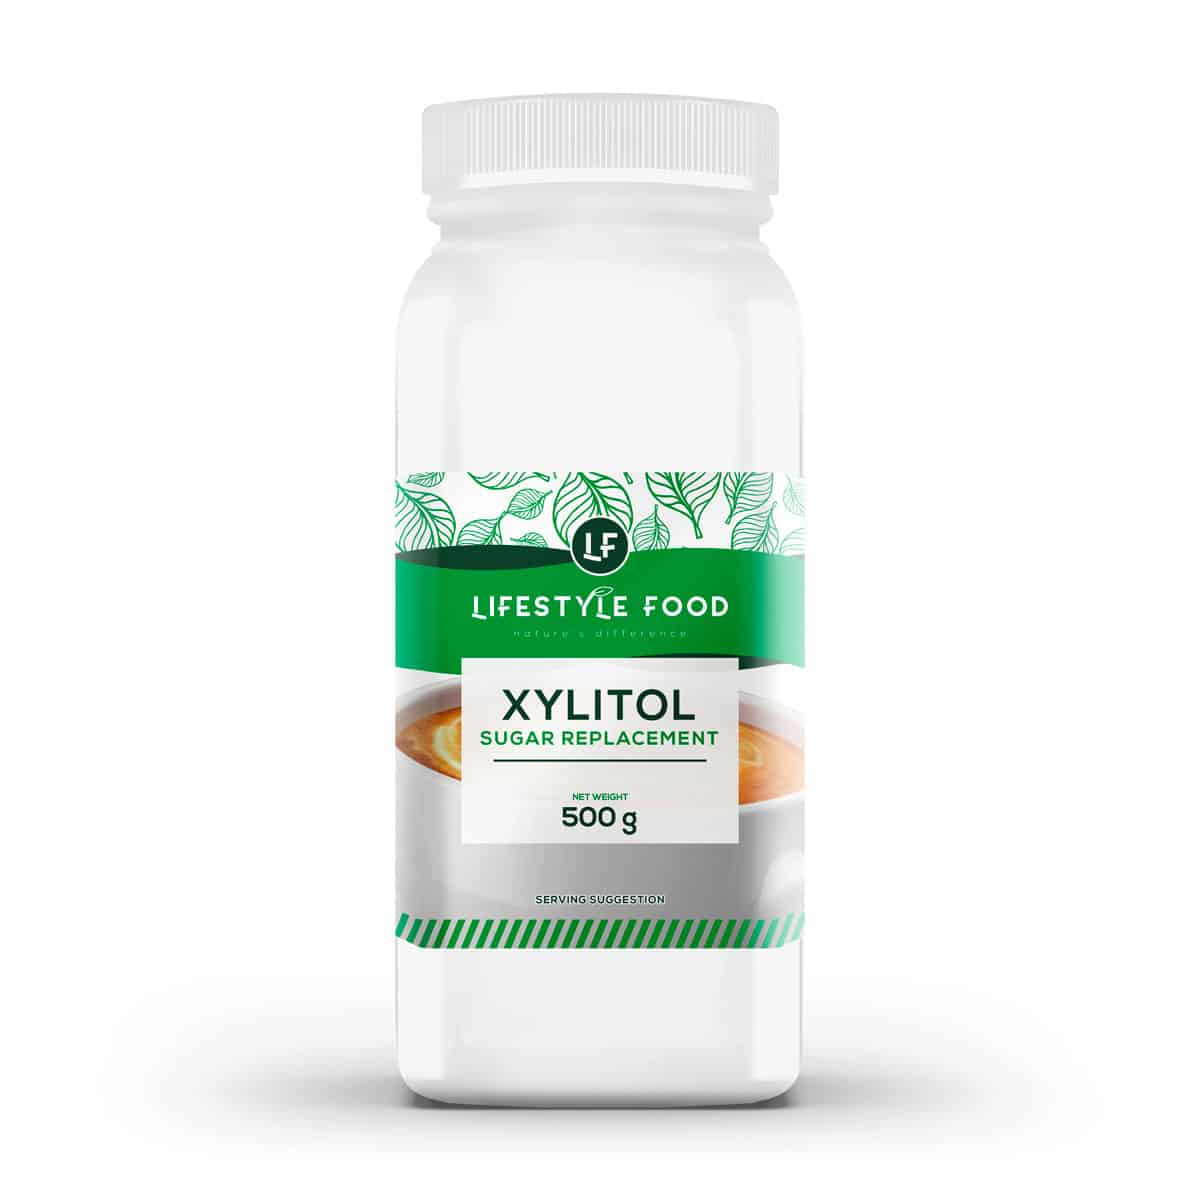 Lifestyle Food Xylitol Sugar Replacement - 500g